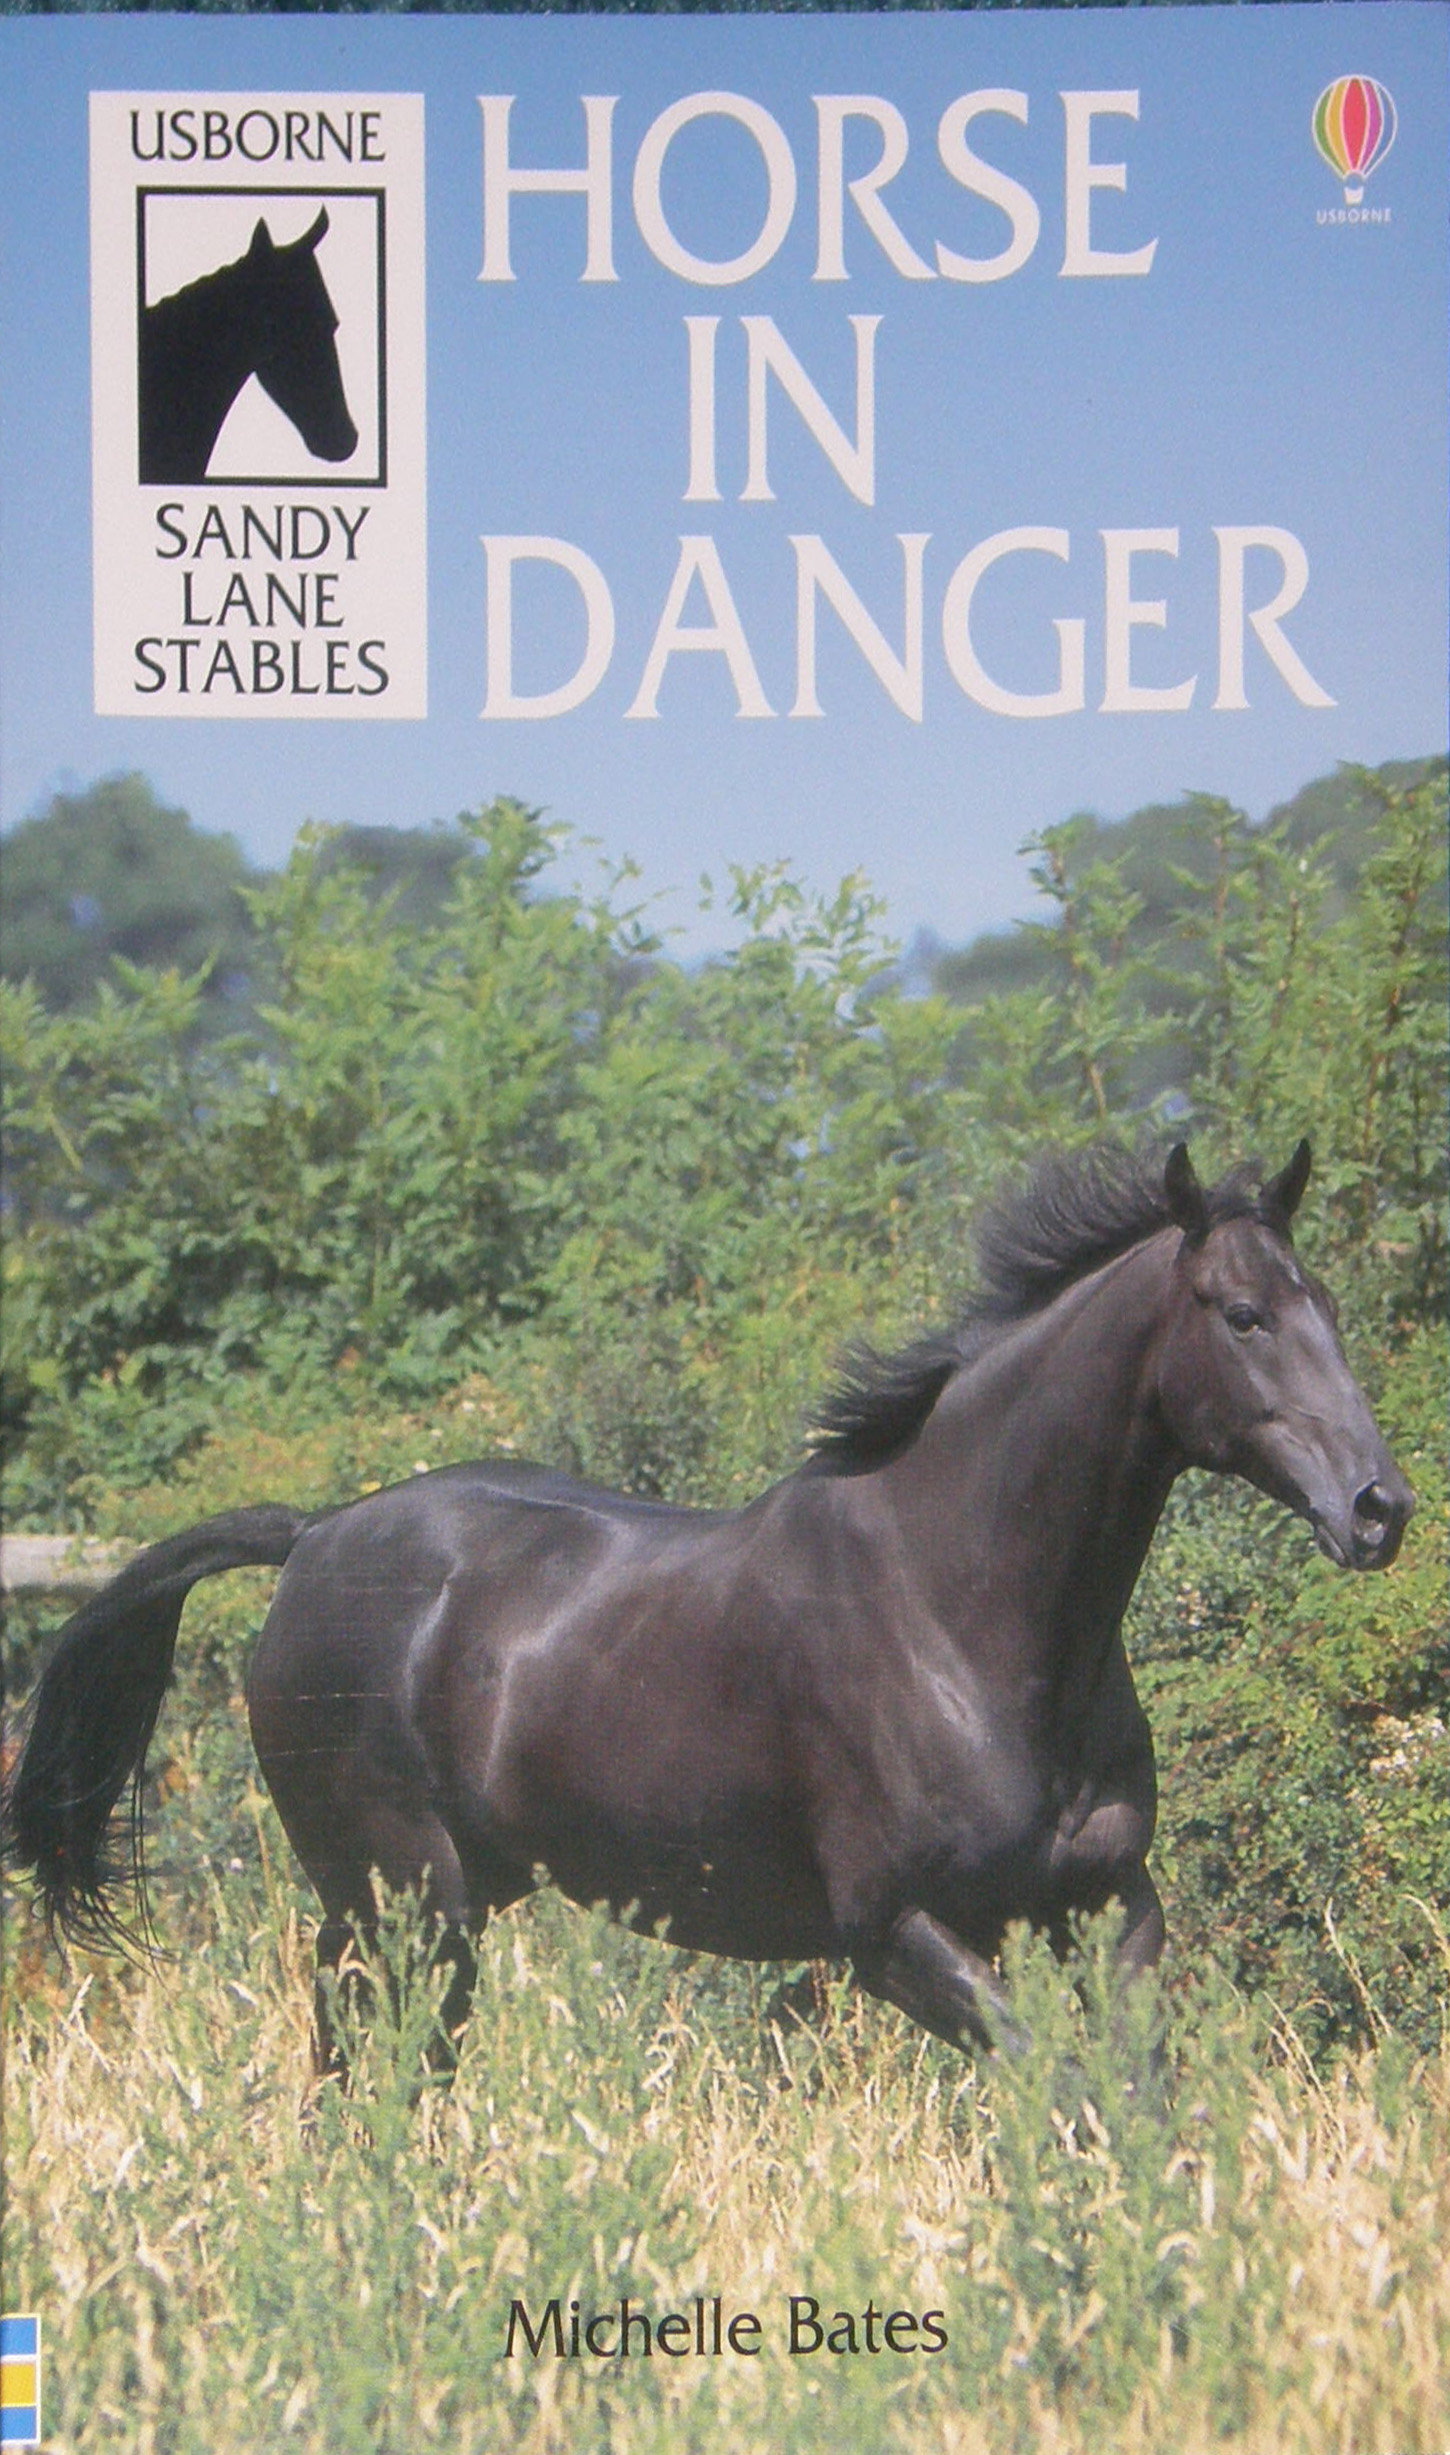 Horse in Danger Sandy Lane Stables #7 Horse Book by Michelle Bates